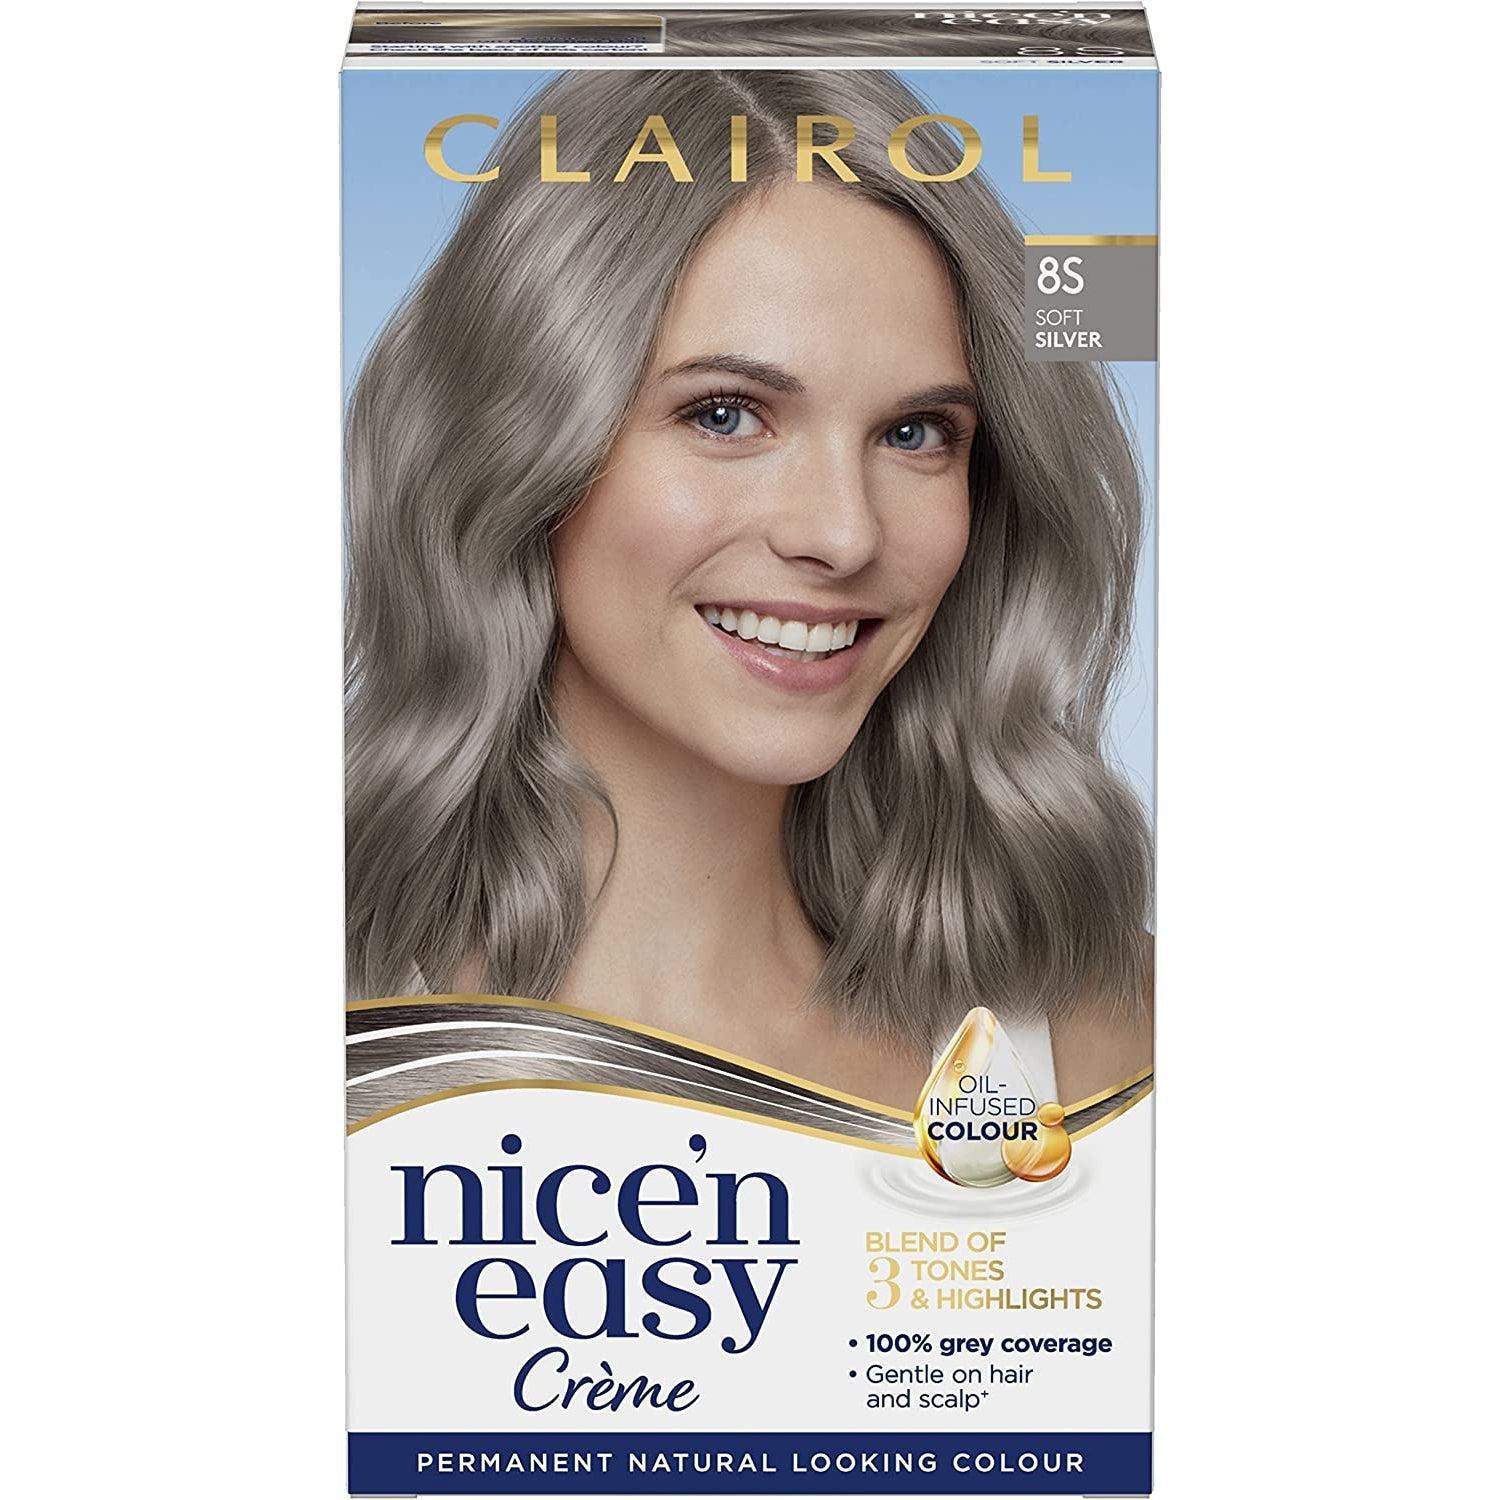 Clairol Nice'n Easy Crème, Natural Looking Oil Infused Permanent Hair Dye, 8S Soft Silver - Healthxpress.ie